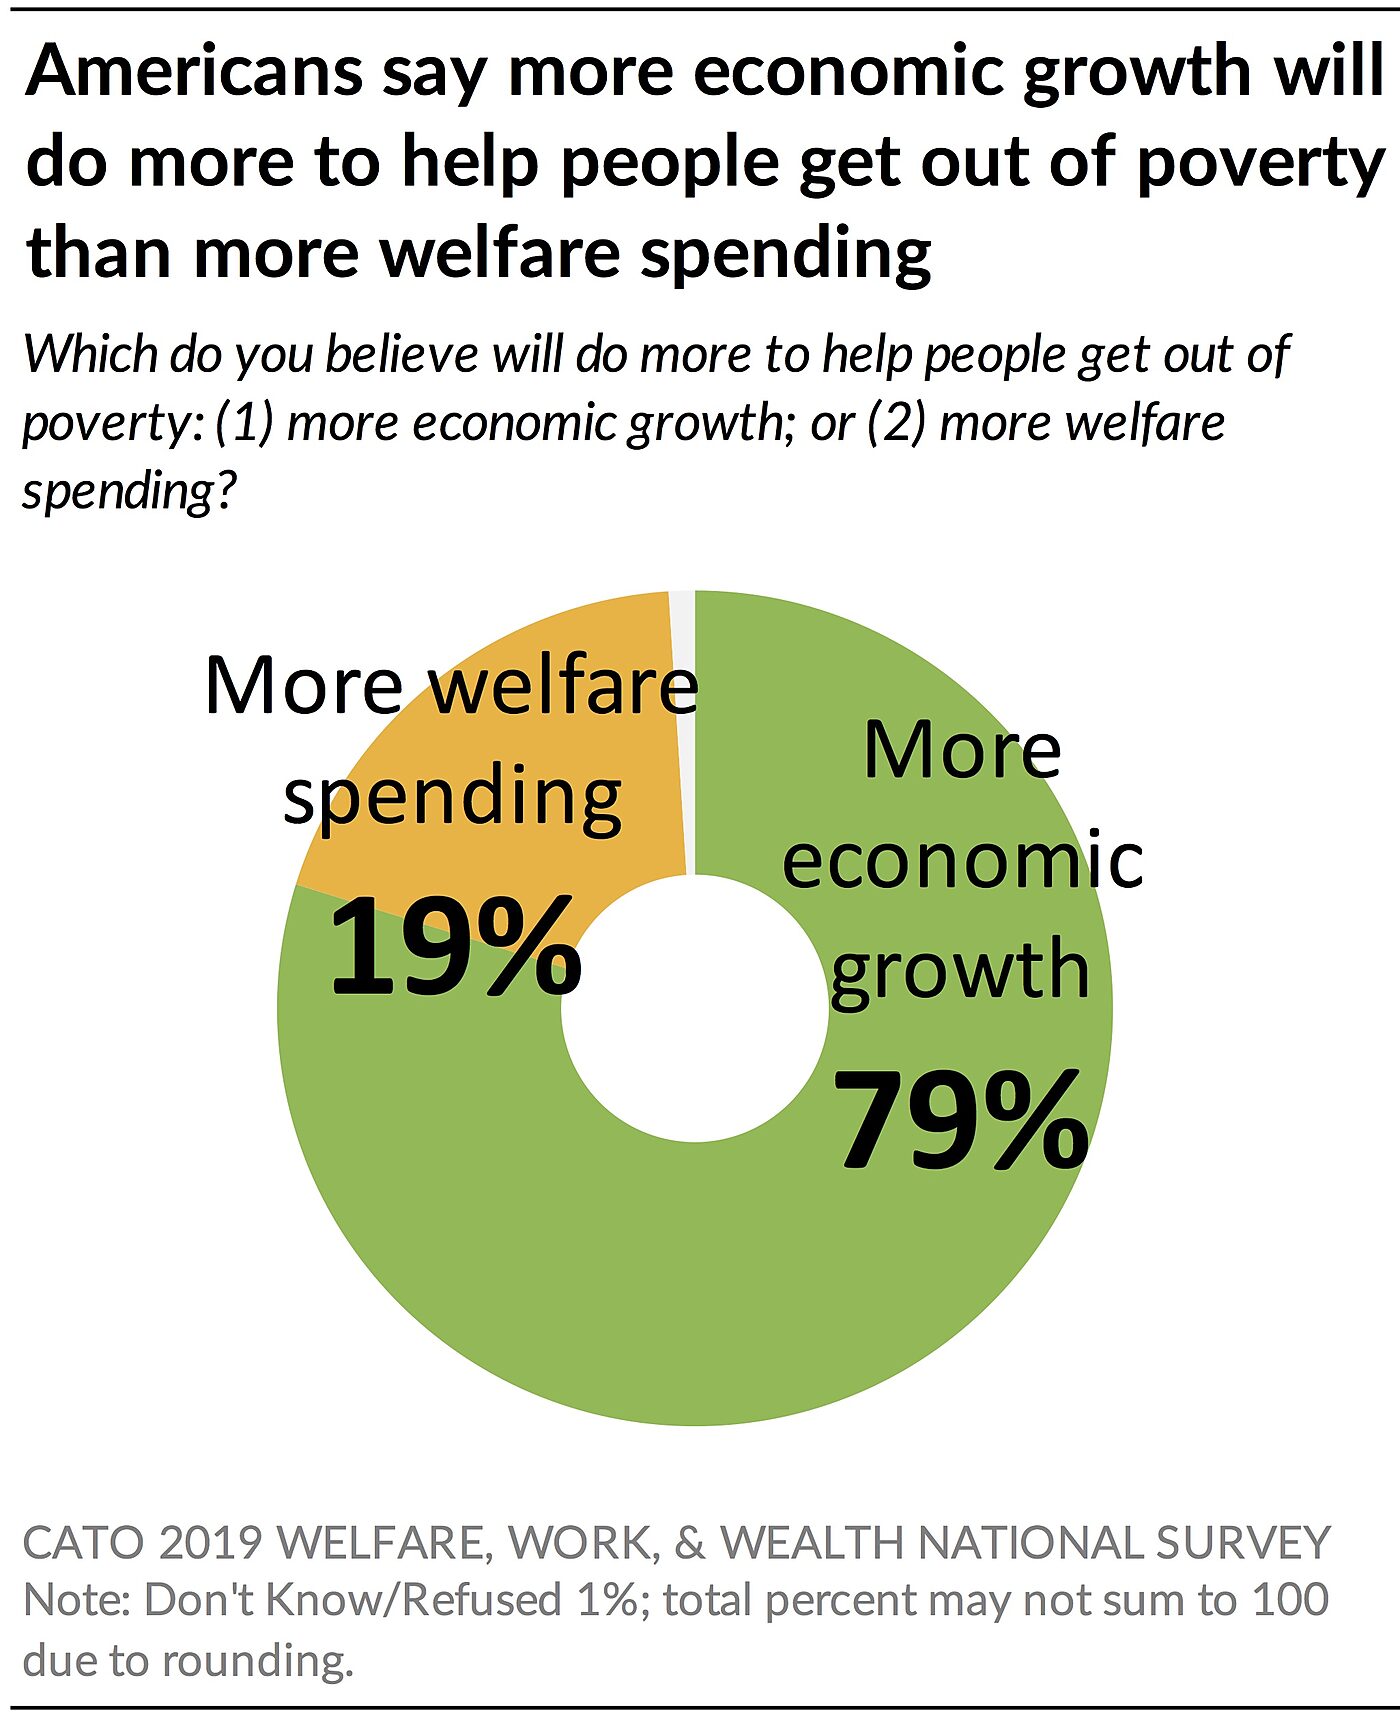 Americans say economic growth will do more to help than welfare spending